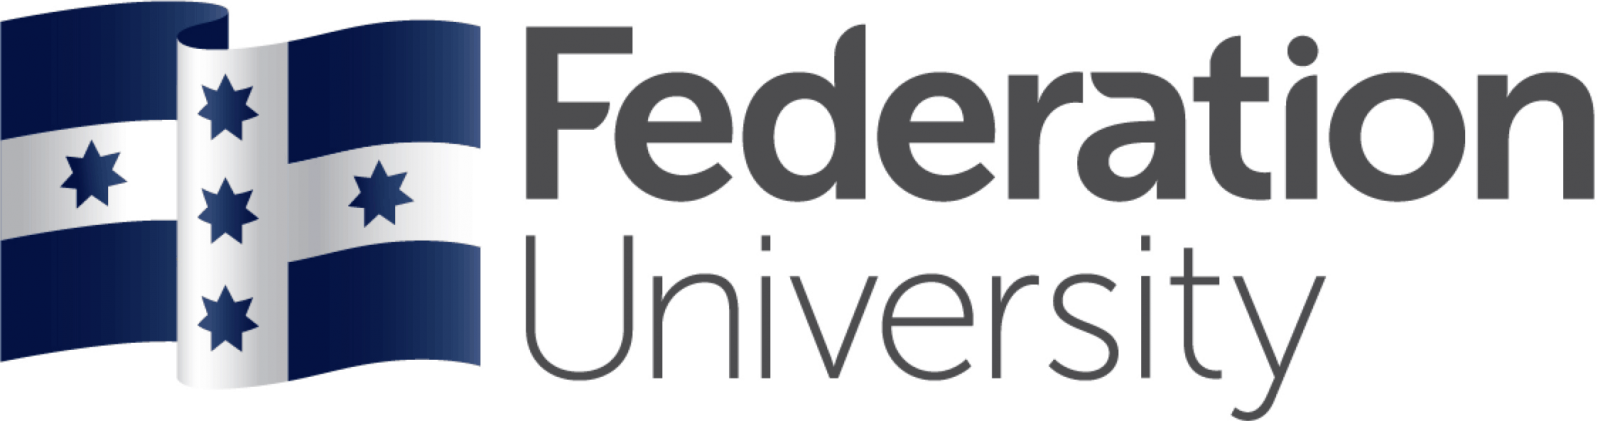 Centre for eResearch and Digital Innovation - Federation University